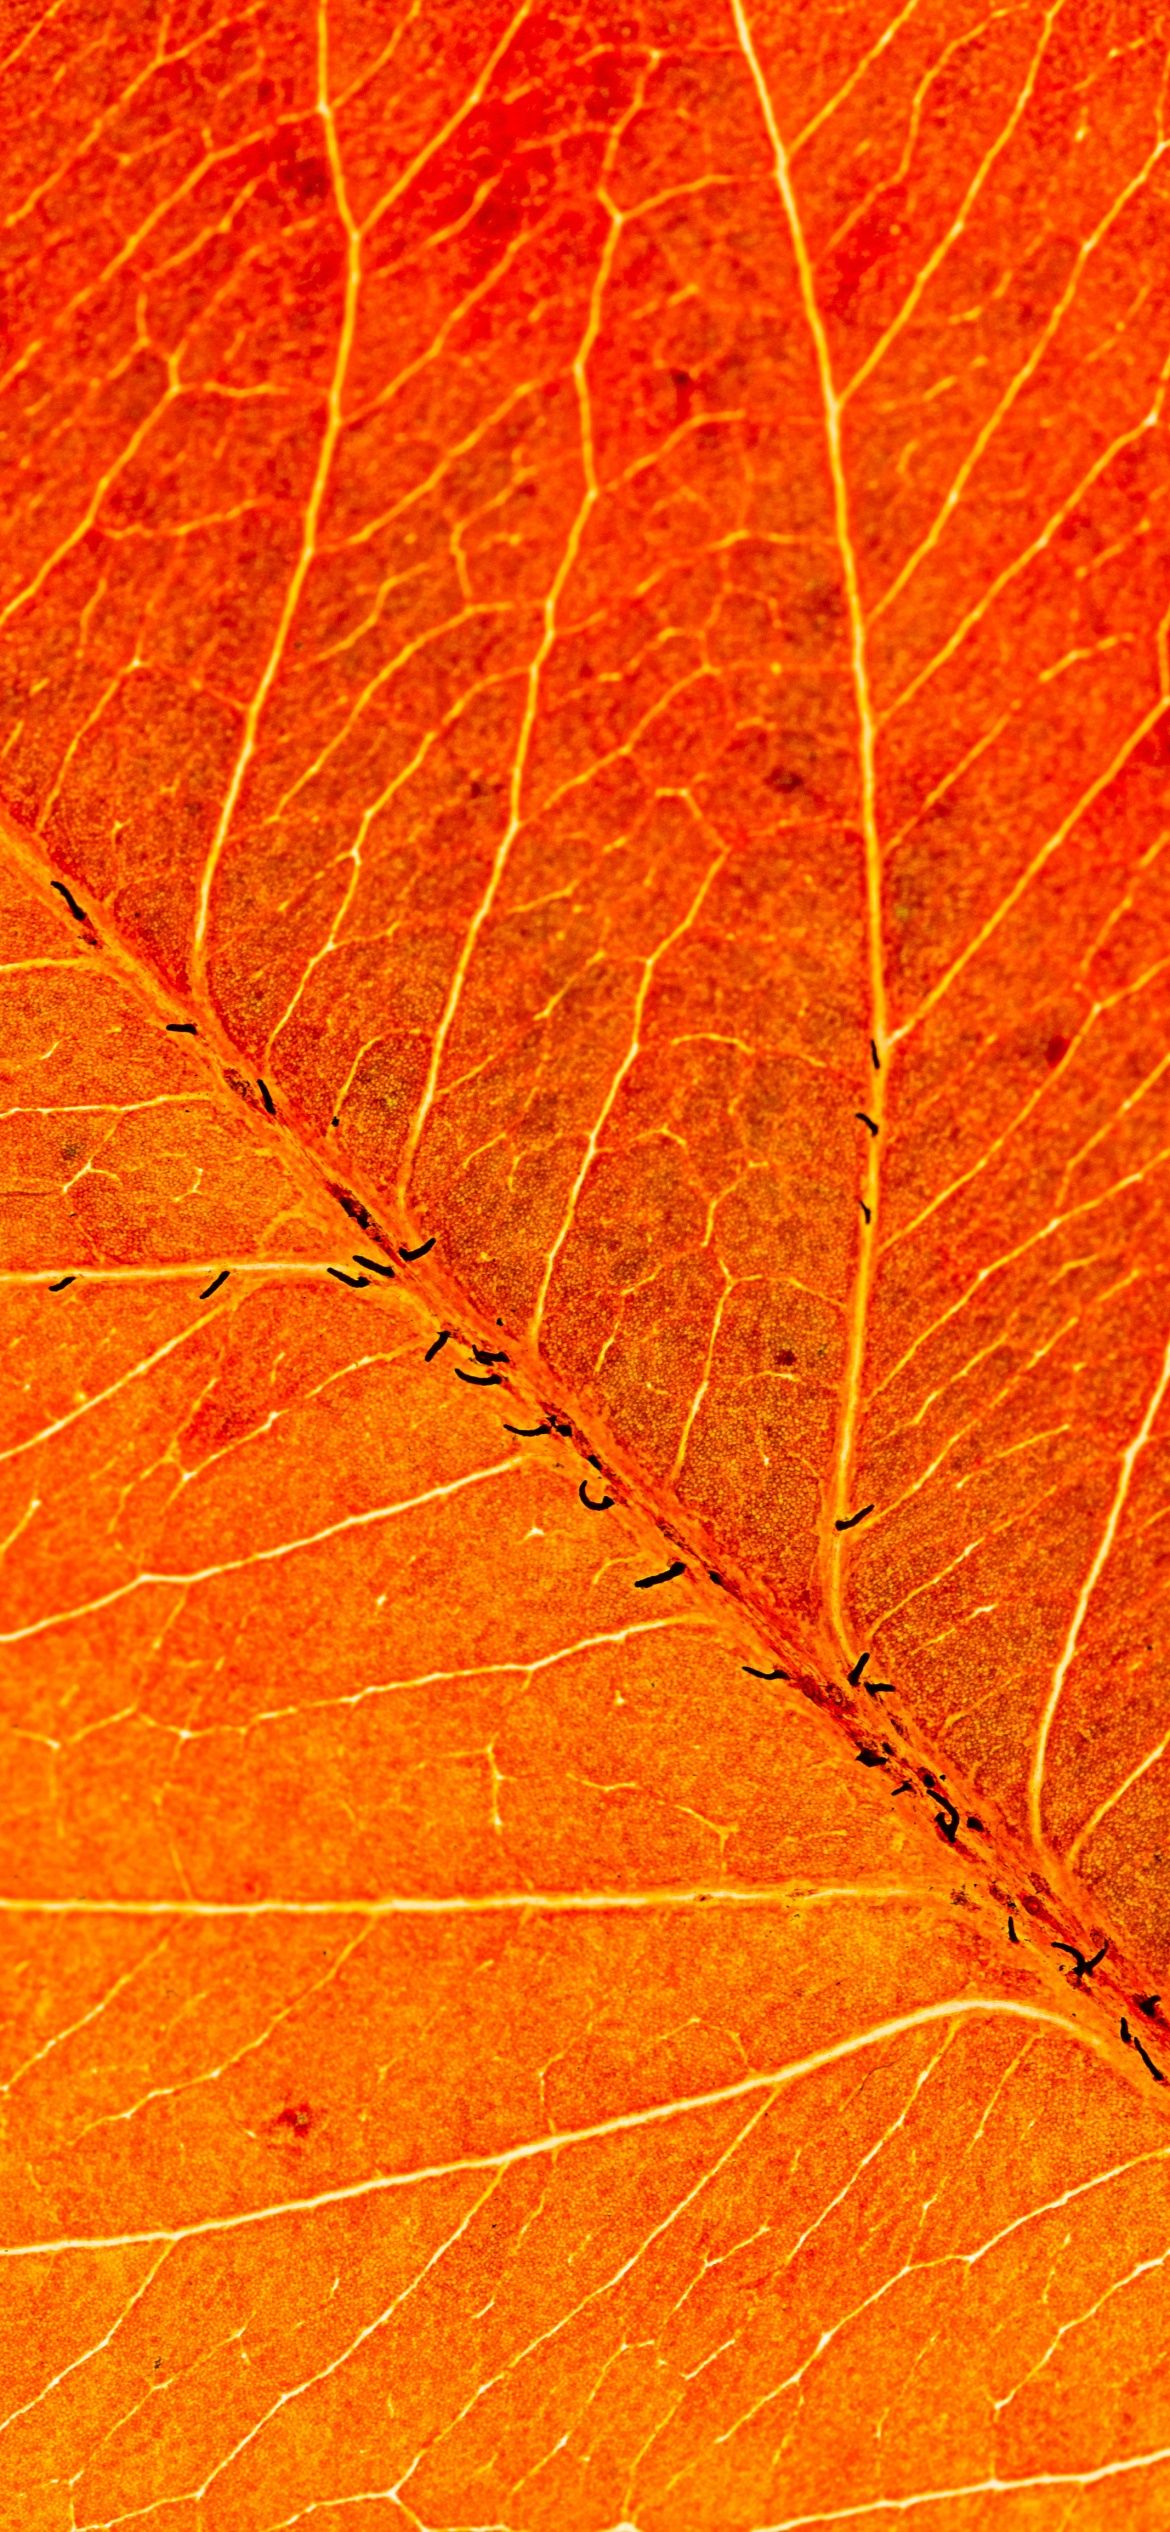 A close-up of an orange leaf with a brief description of at least 20 words but no longer than 50 words and a list of tags that contains 15 tags that can be used to describe this image. - Macro